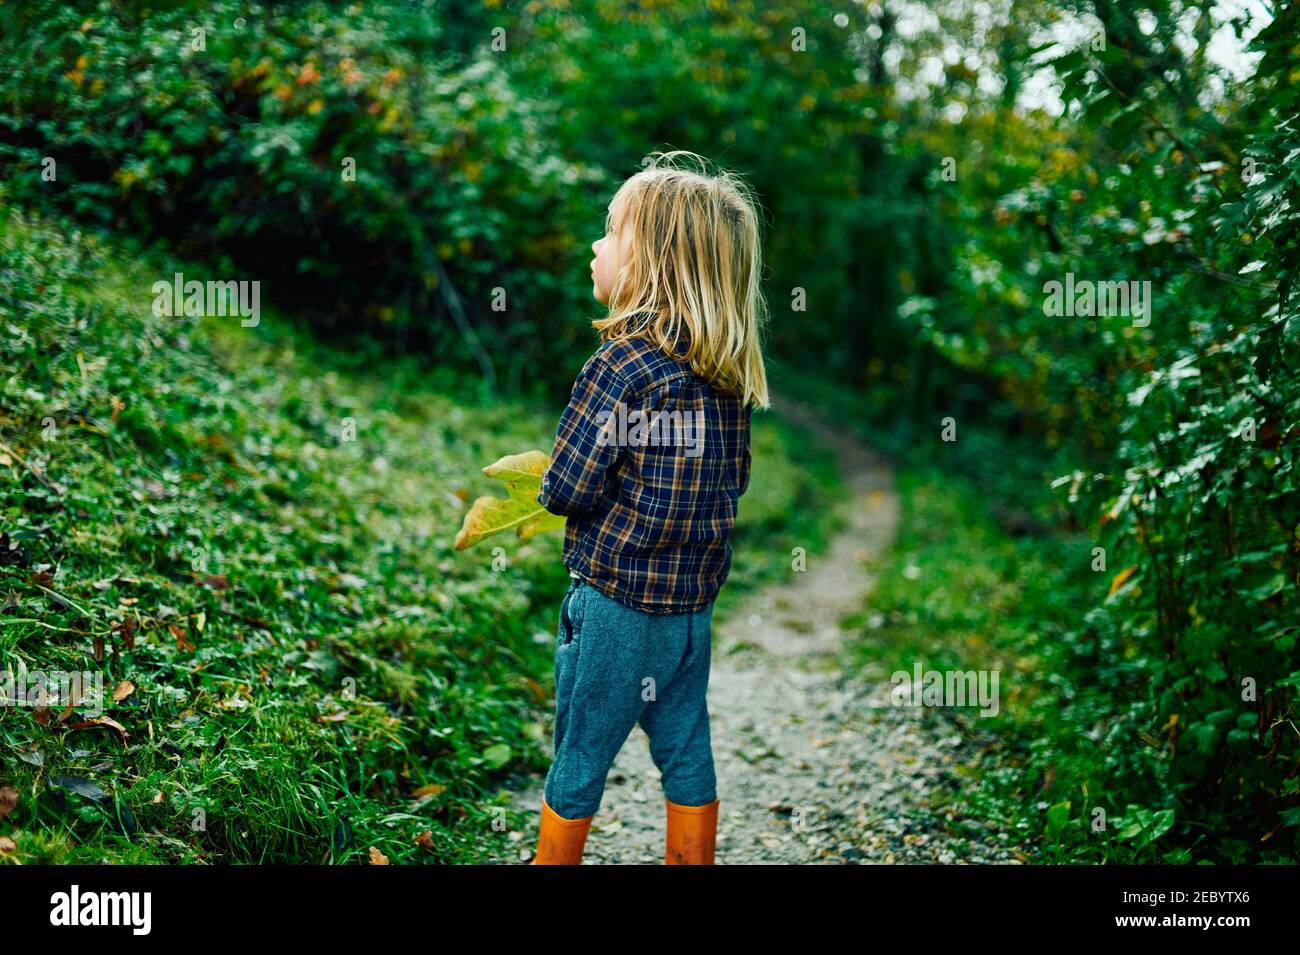 A little preschooler is playing in the woods on a sunny autumn day Stock Photo